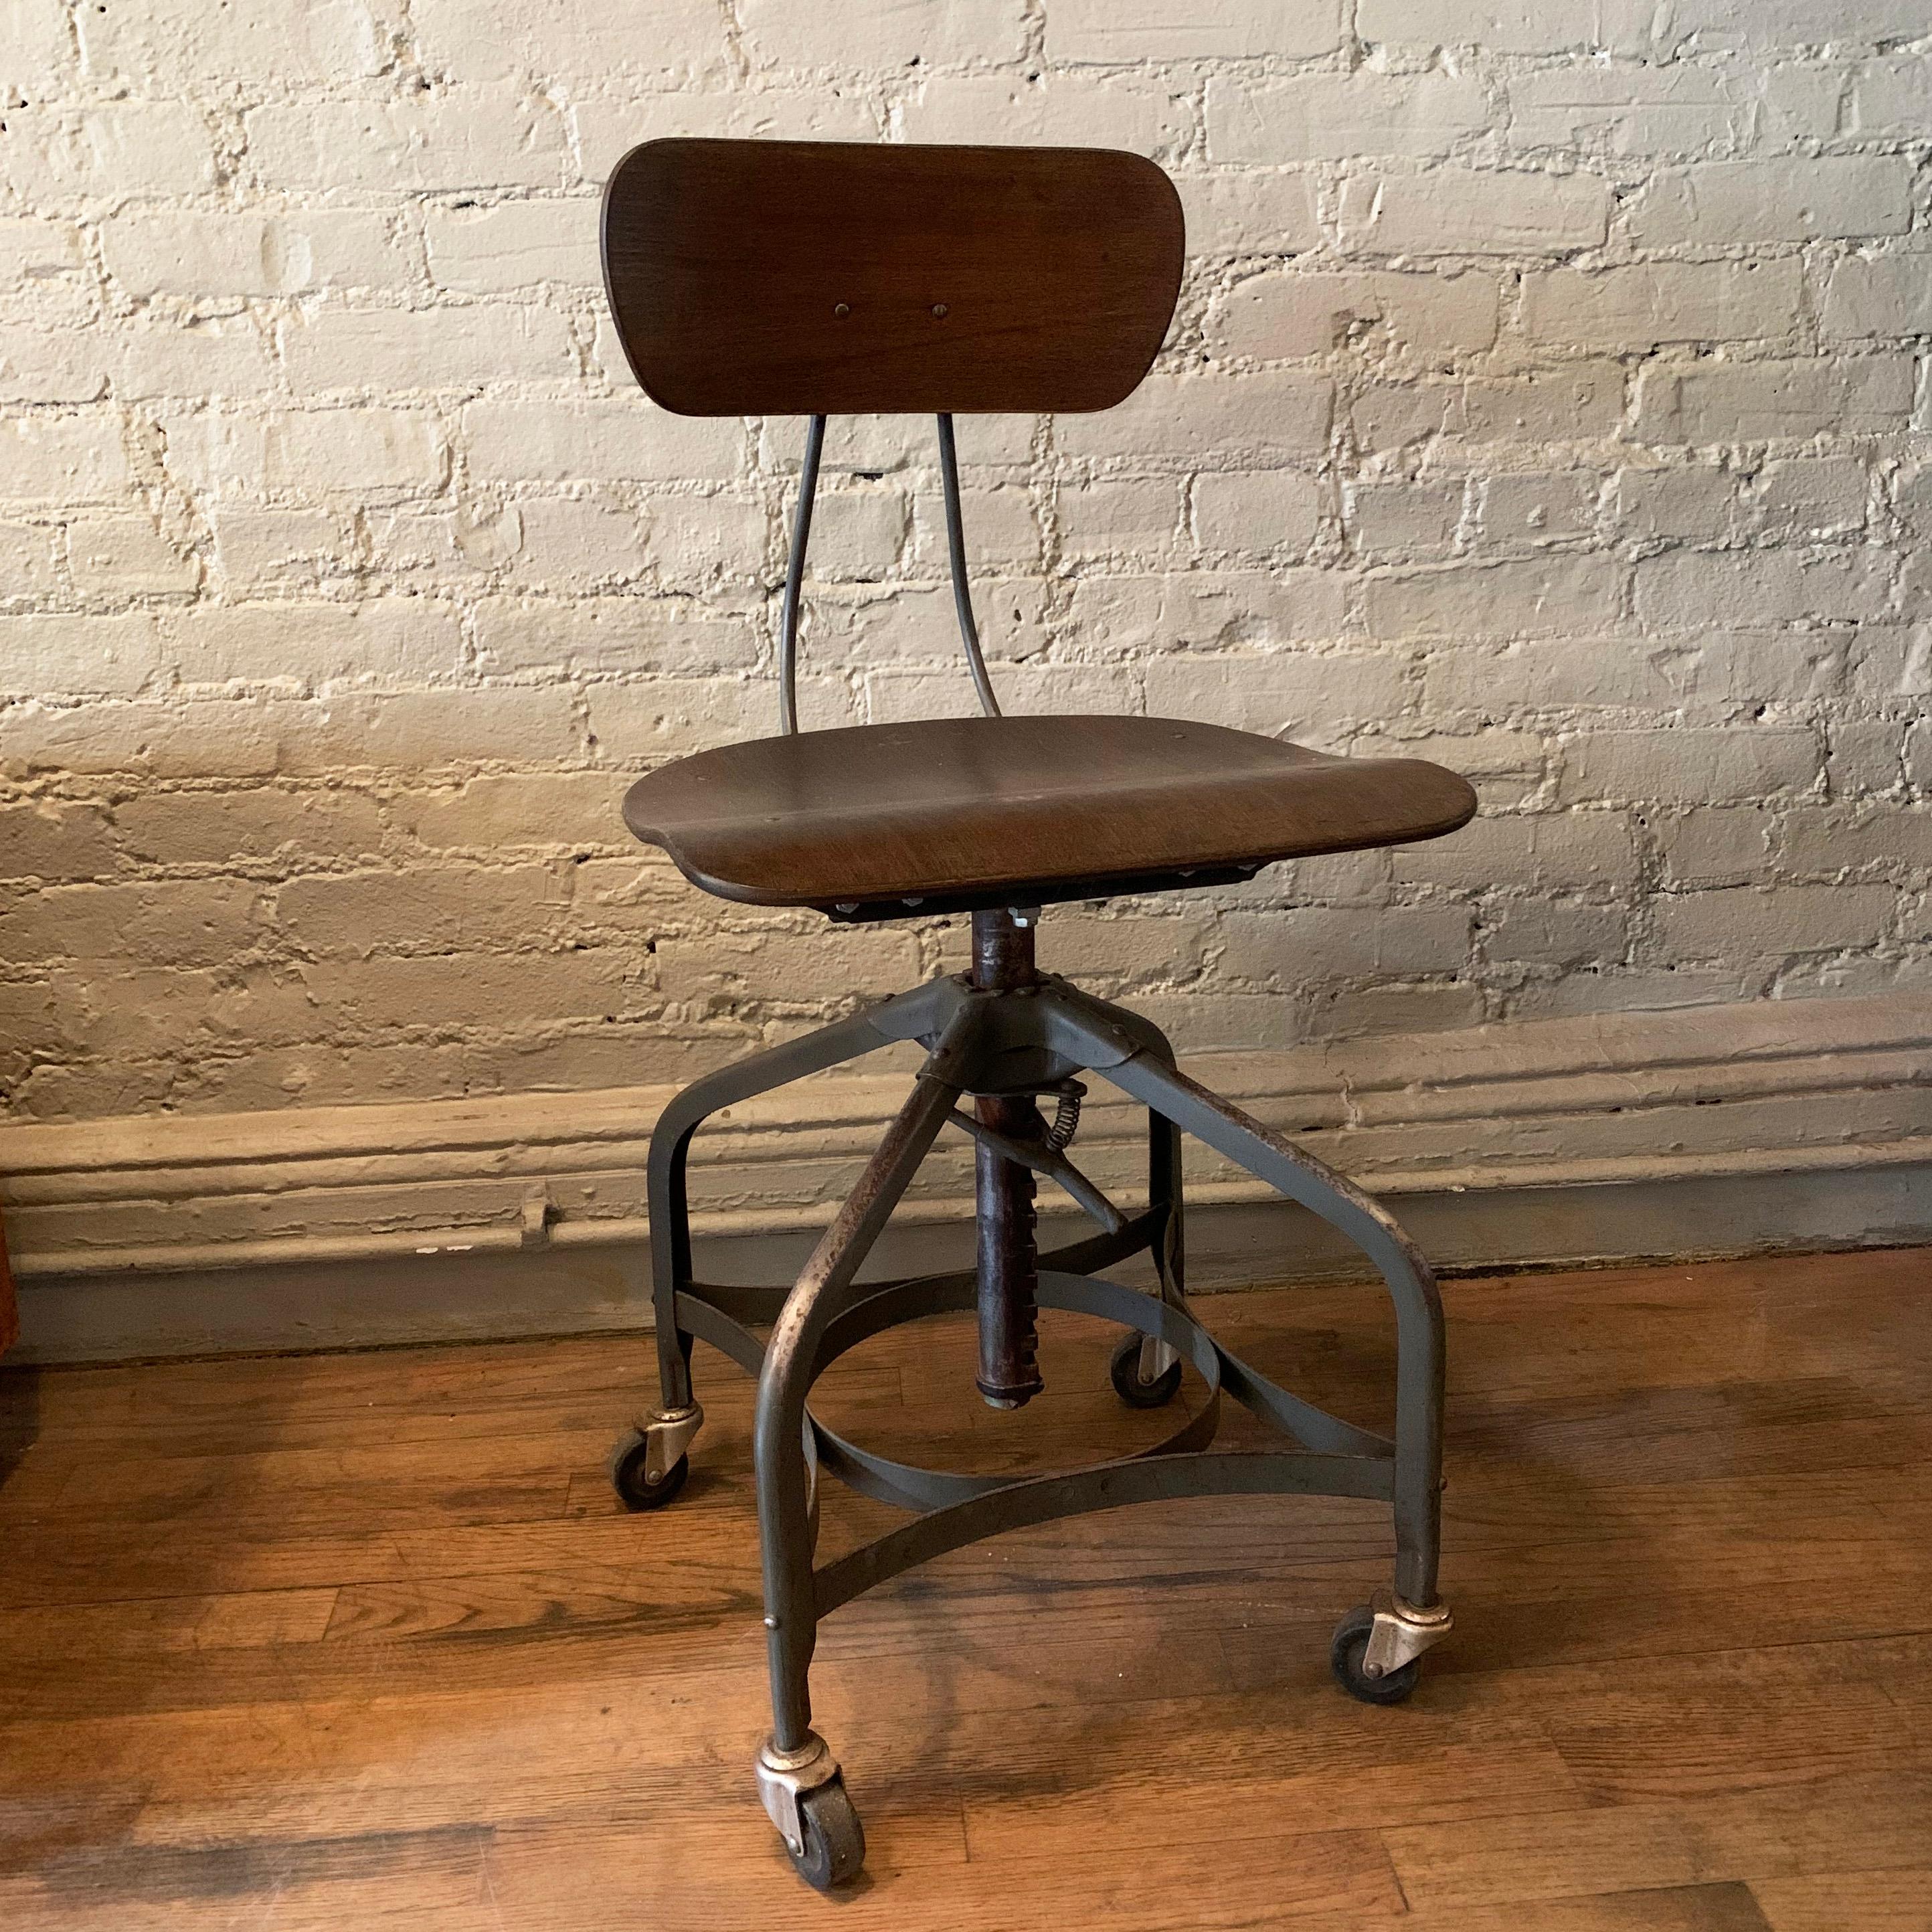 Industrial, rolling, drafting stool by Toledo Metal Furniture Co., features a birch, plywood seat and back with painted steel frame that is seat height adjustable from 19 - 24 inches.